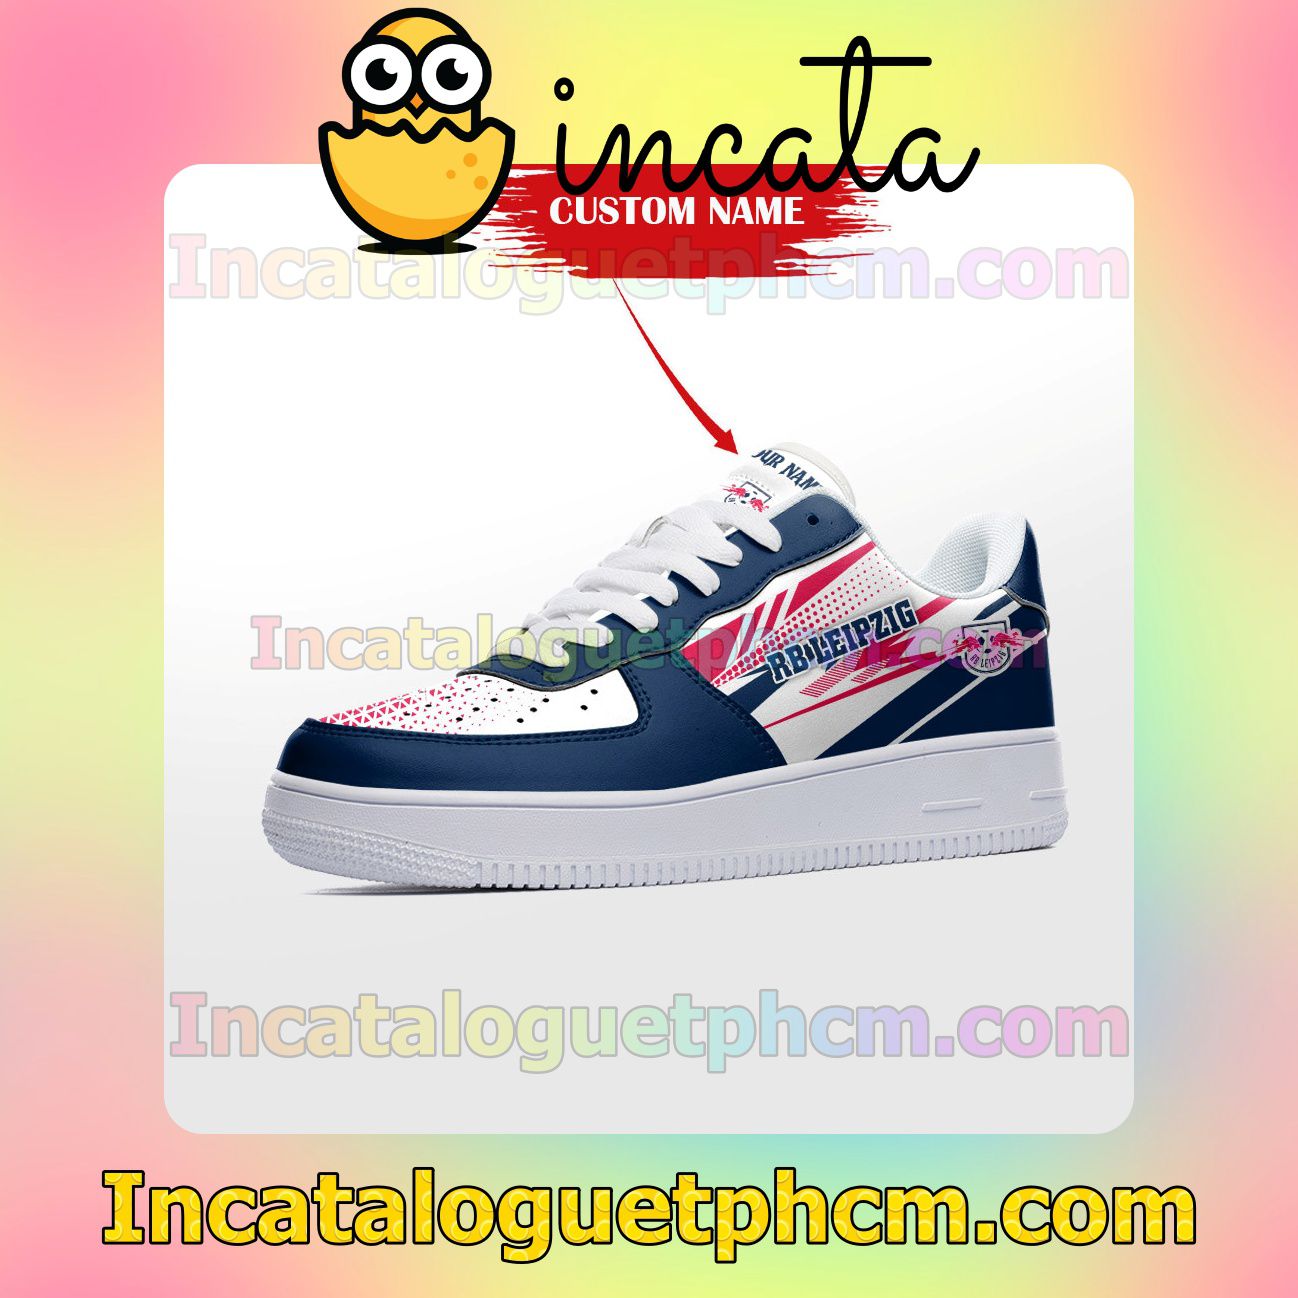 Fast Shipping Personalized Bundesliga RB Leipzig Custom Name Nike Low Shoes Sneakers